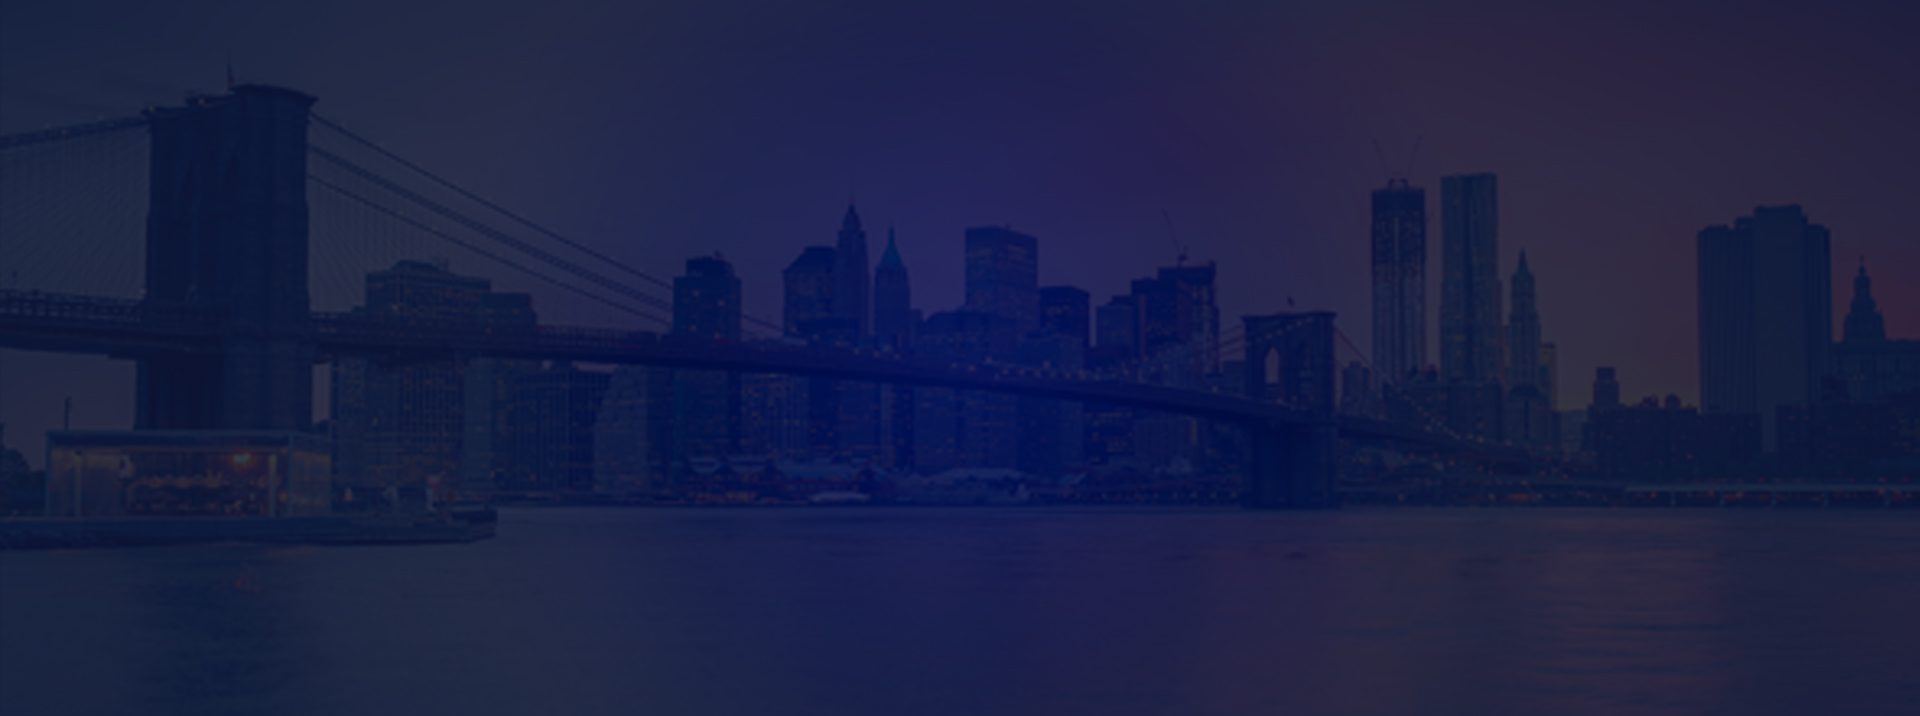 Greater New York Landing Page Banner Background